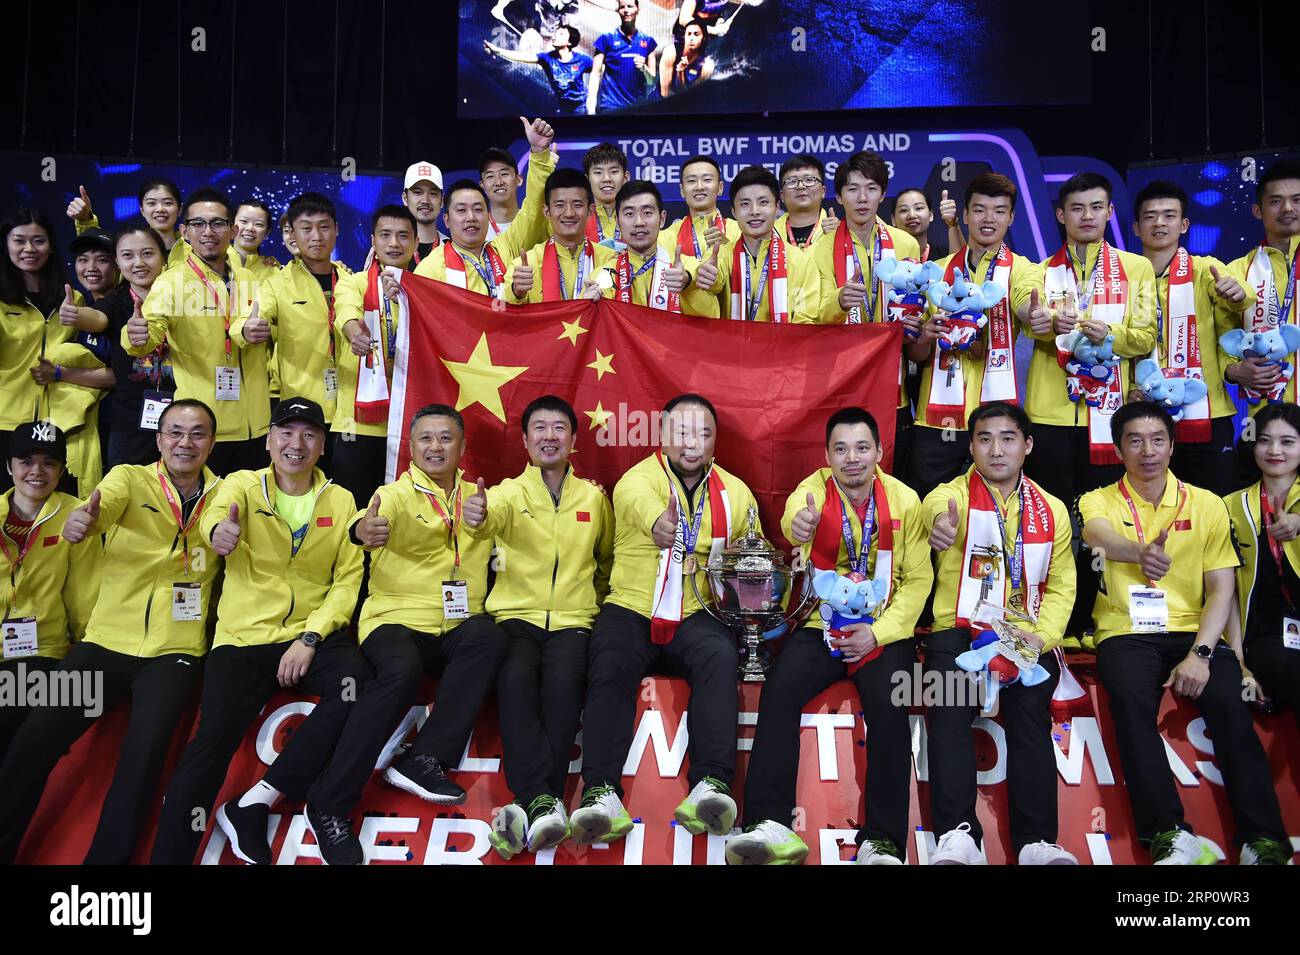 180527) -- BANGKOK, May 27, 2018 -- Team China celebrate during the medal presenting ceremony after winning the final against team Japan at the Thomas Cup badminton tournament in Bangkok, Thailand, on